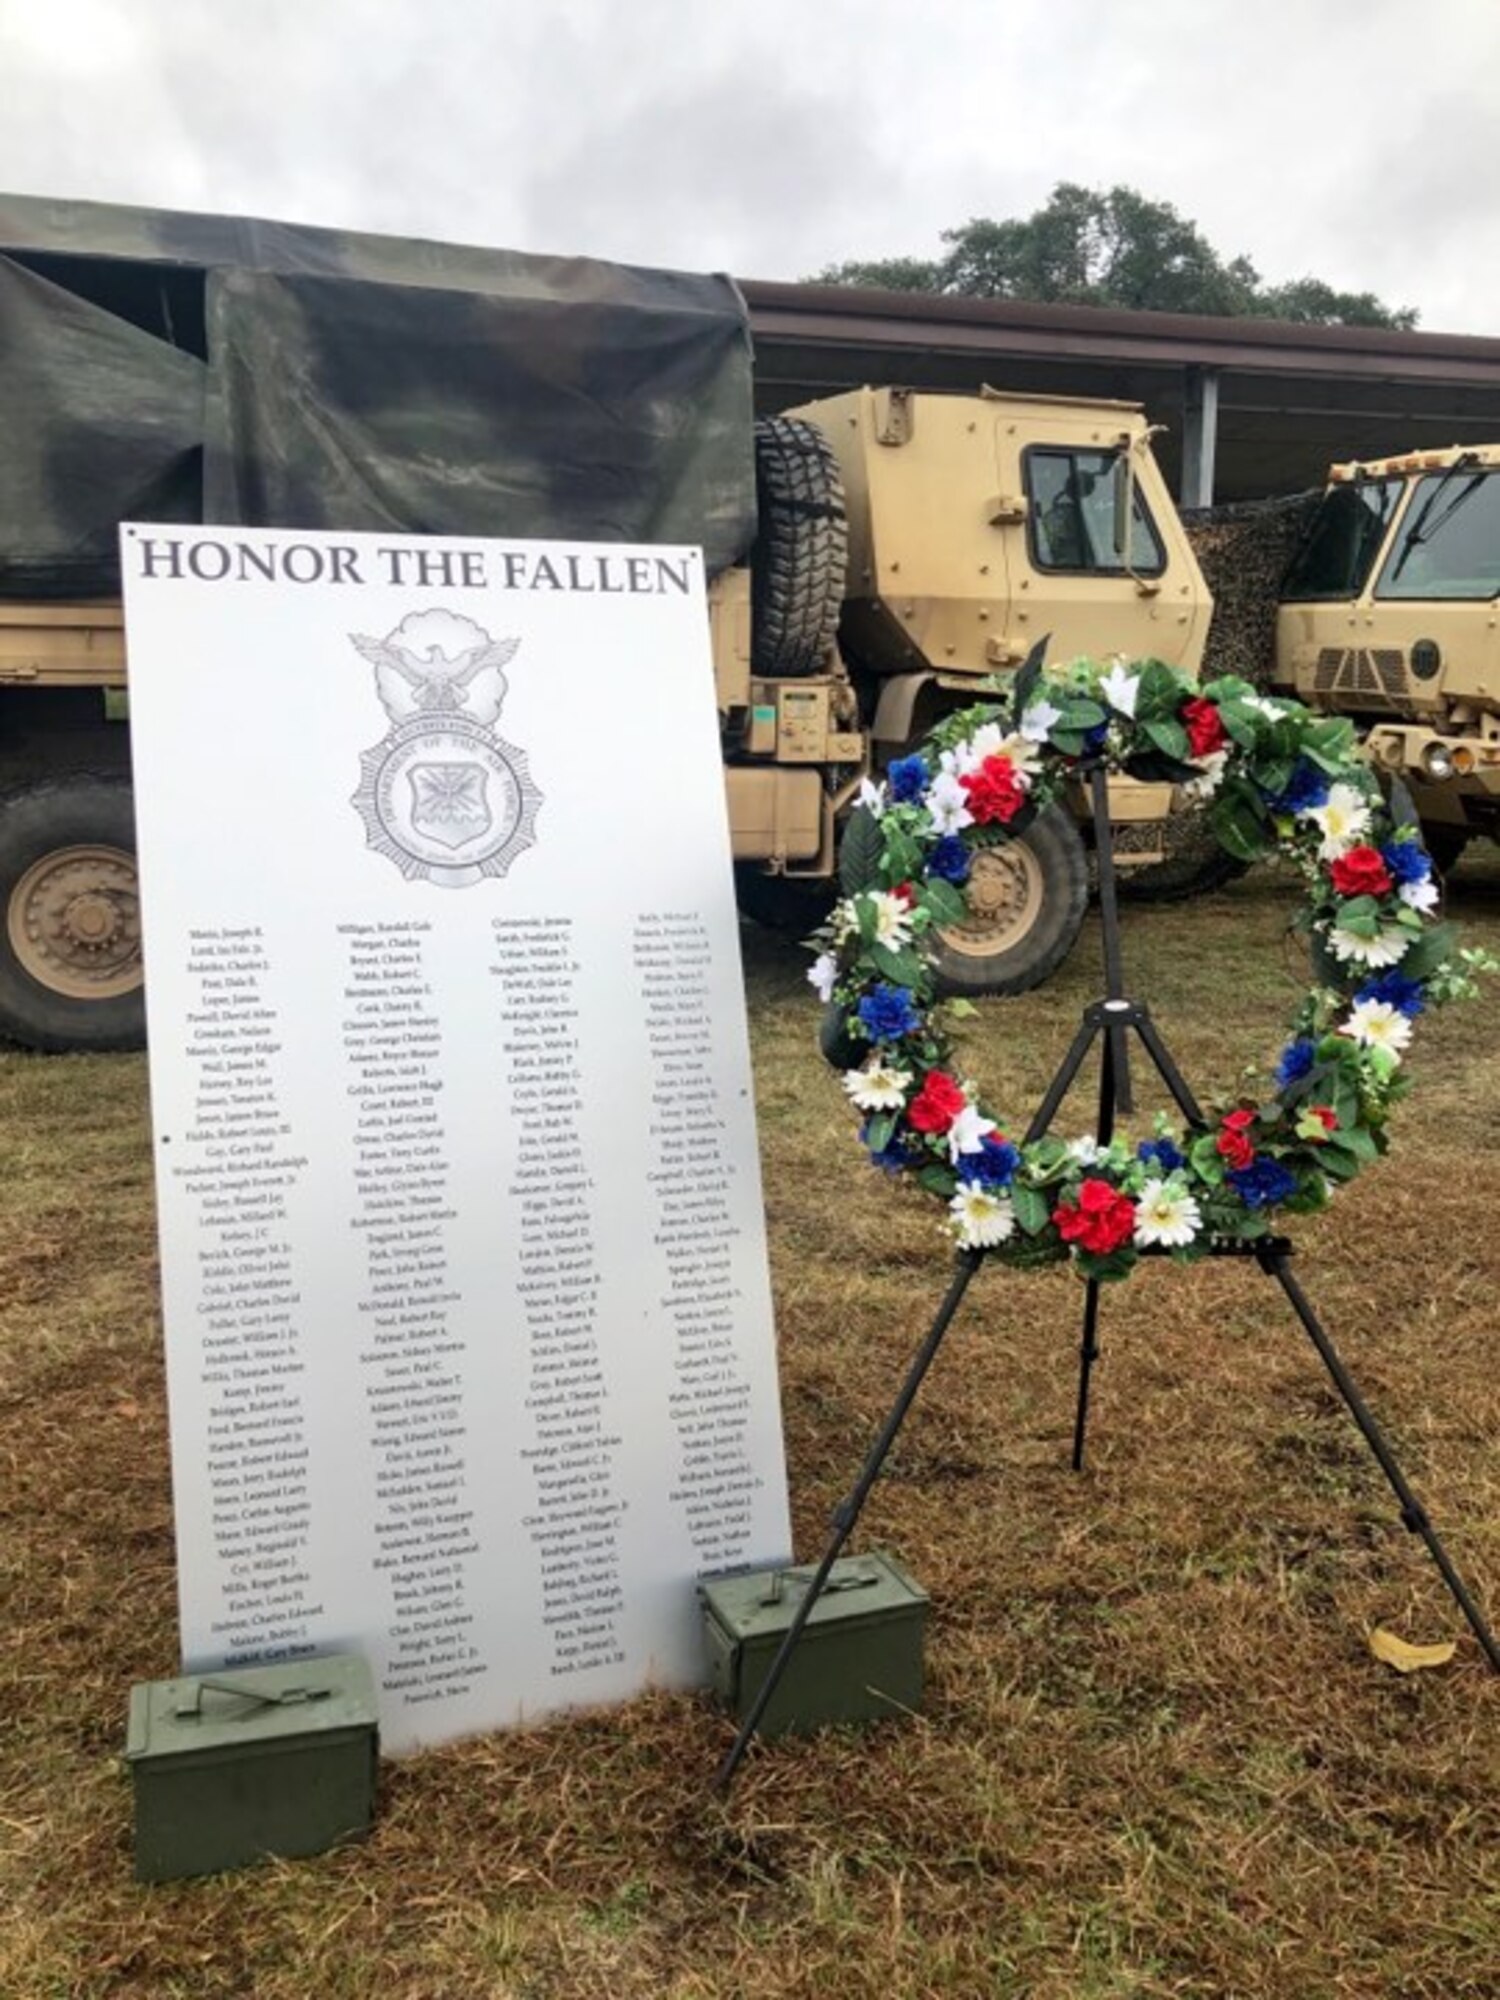 A plaque was unveiled during the ruck that displayed the 186 names of all Air Force Security Forces Defenders who died performing their duties since 1950. It will be hung in Carter Hall, JBSA-Lackland, which is the location where all Air Force Security Forces training takes place—from technical training at the Security Forces Apprentice Course, to upgrade and advanced courses and all officer training at the Security Forces Academy.